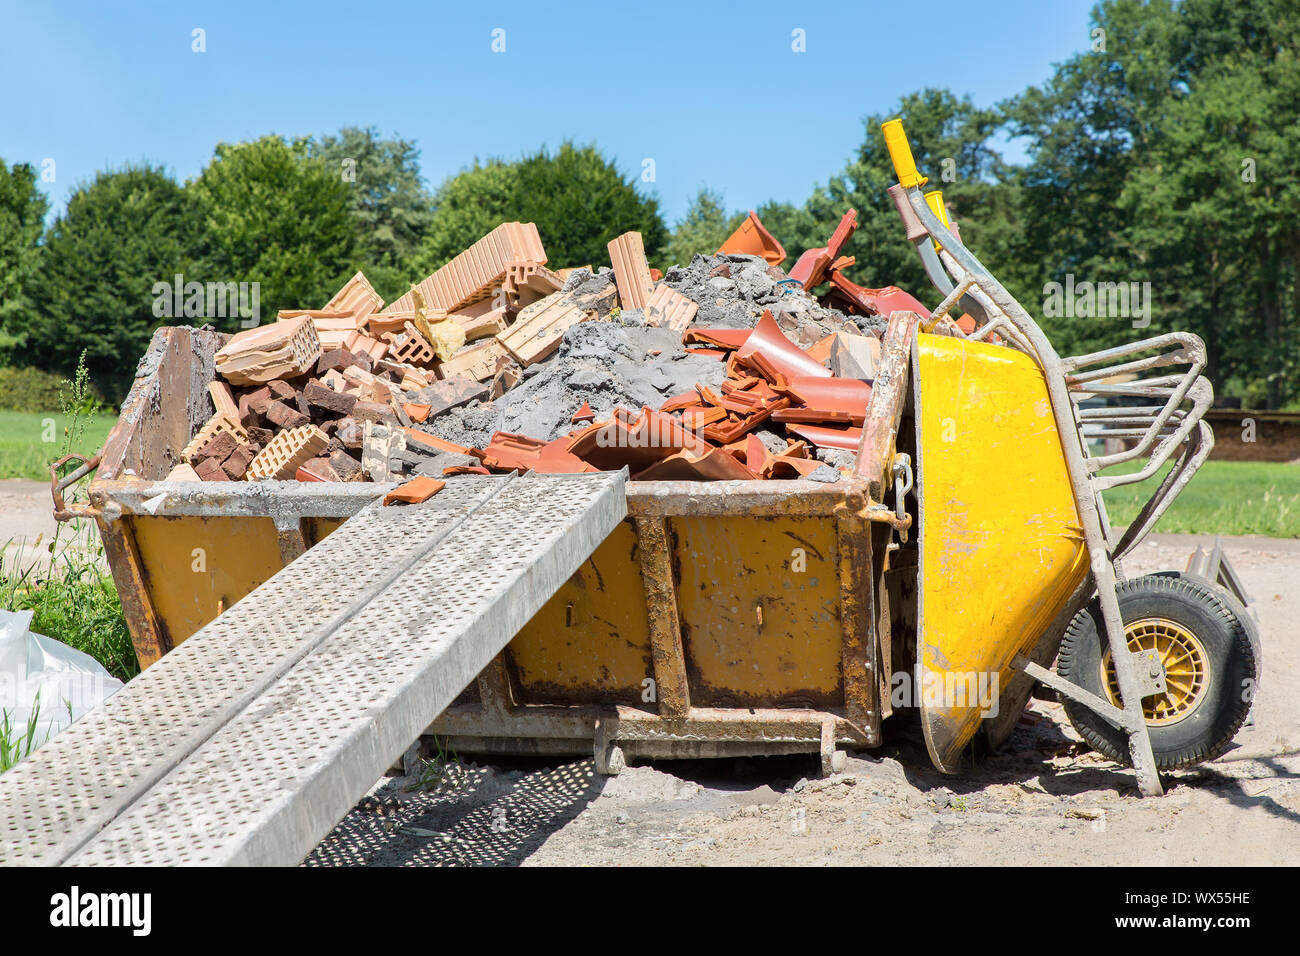 Container with debris and wheelbarrow outside Stock Photo